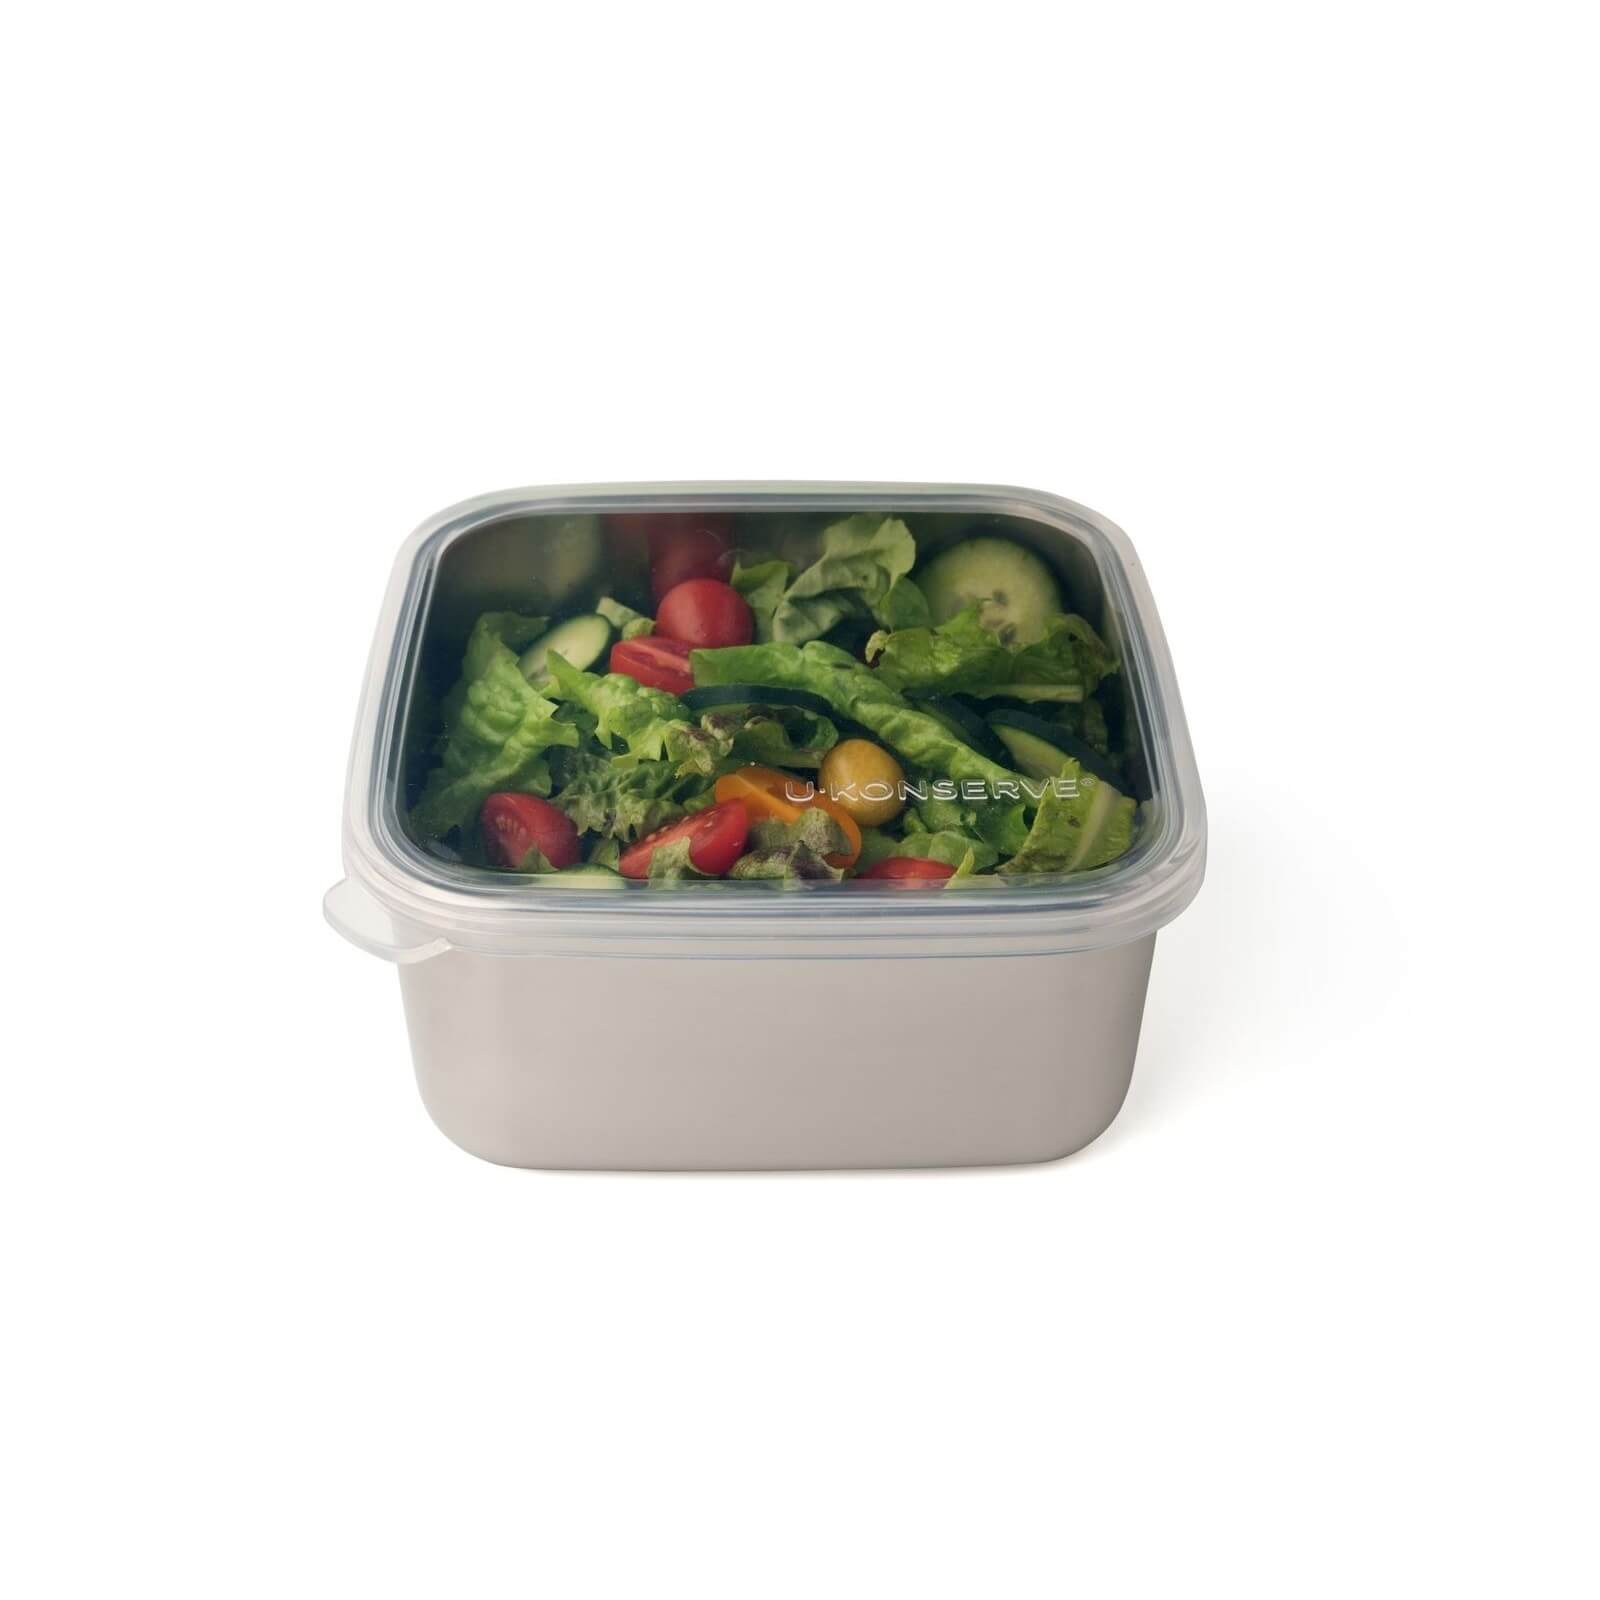 Stainless steel container